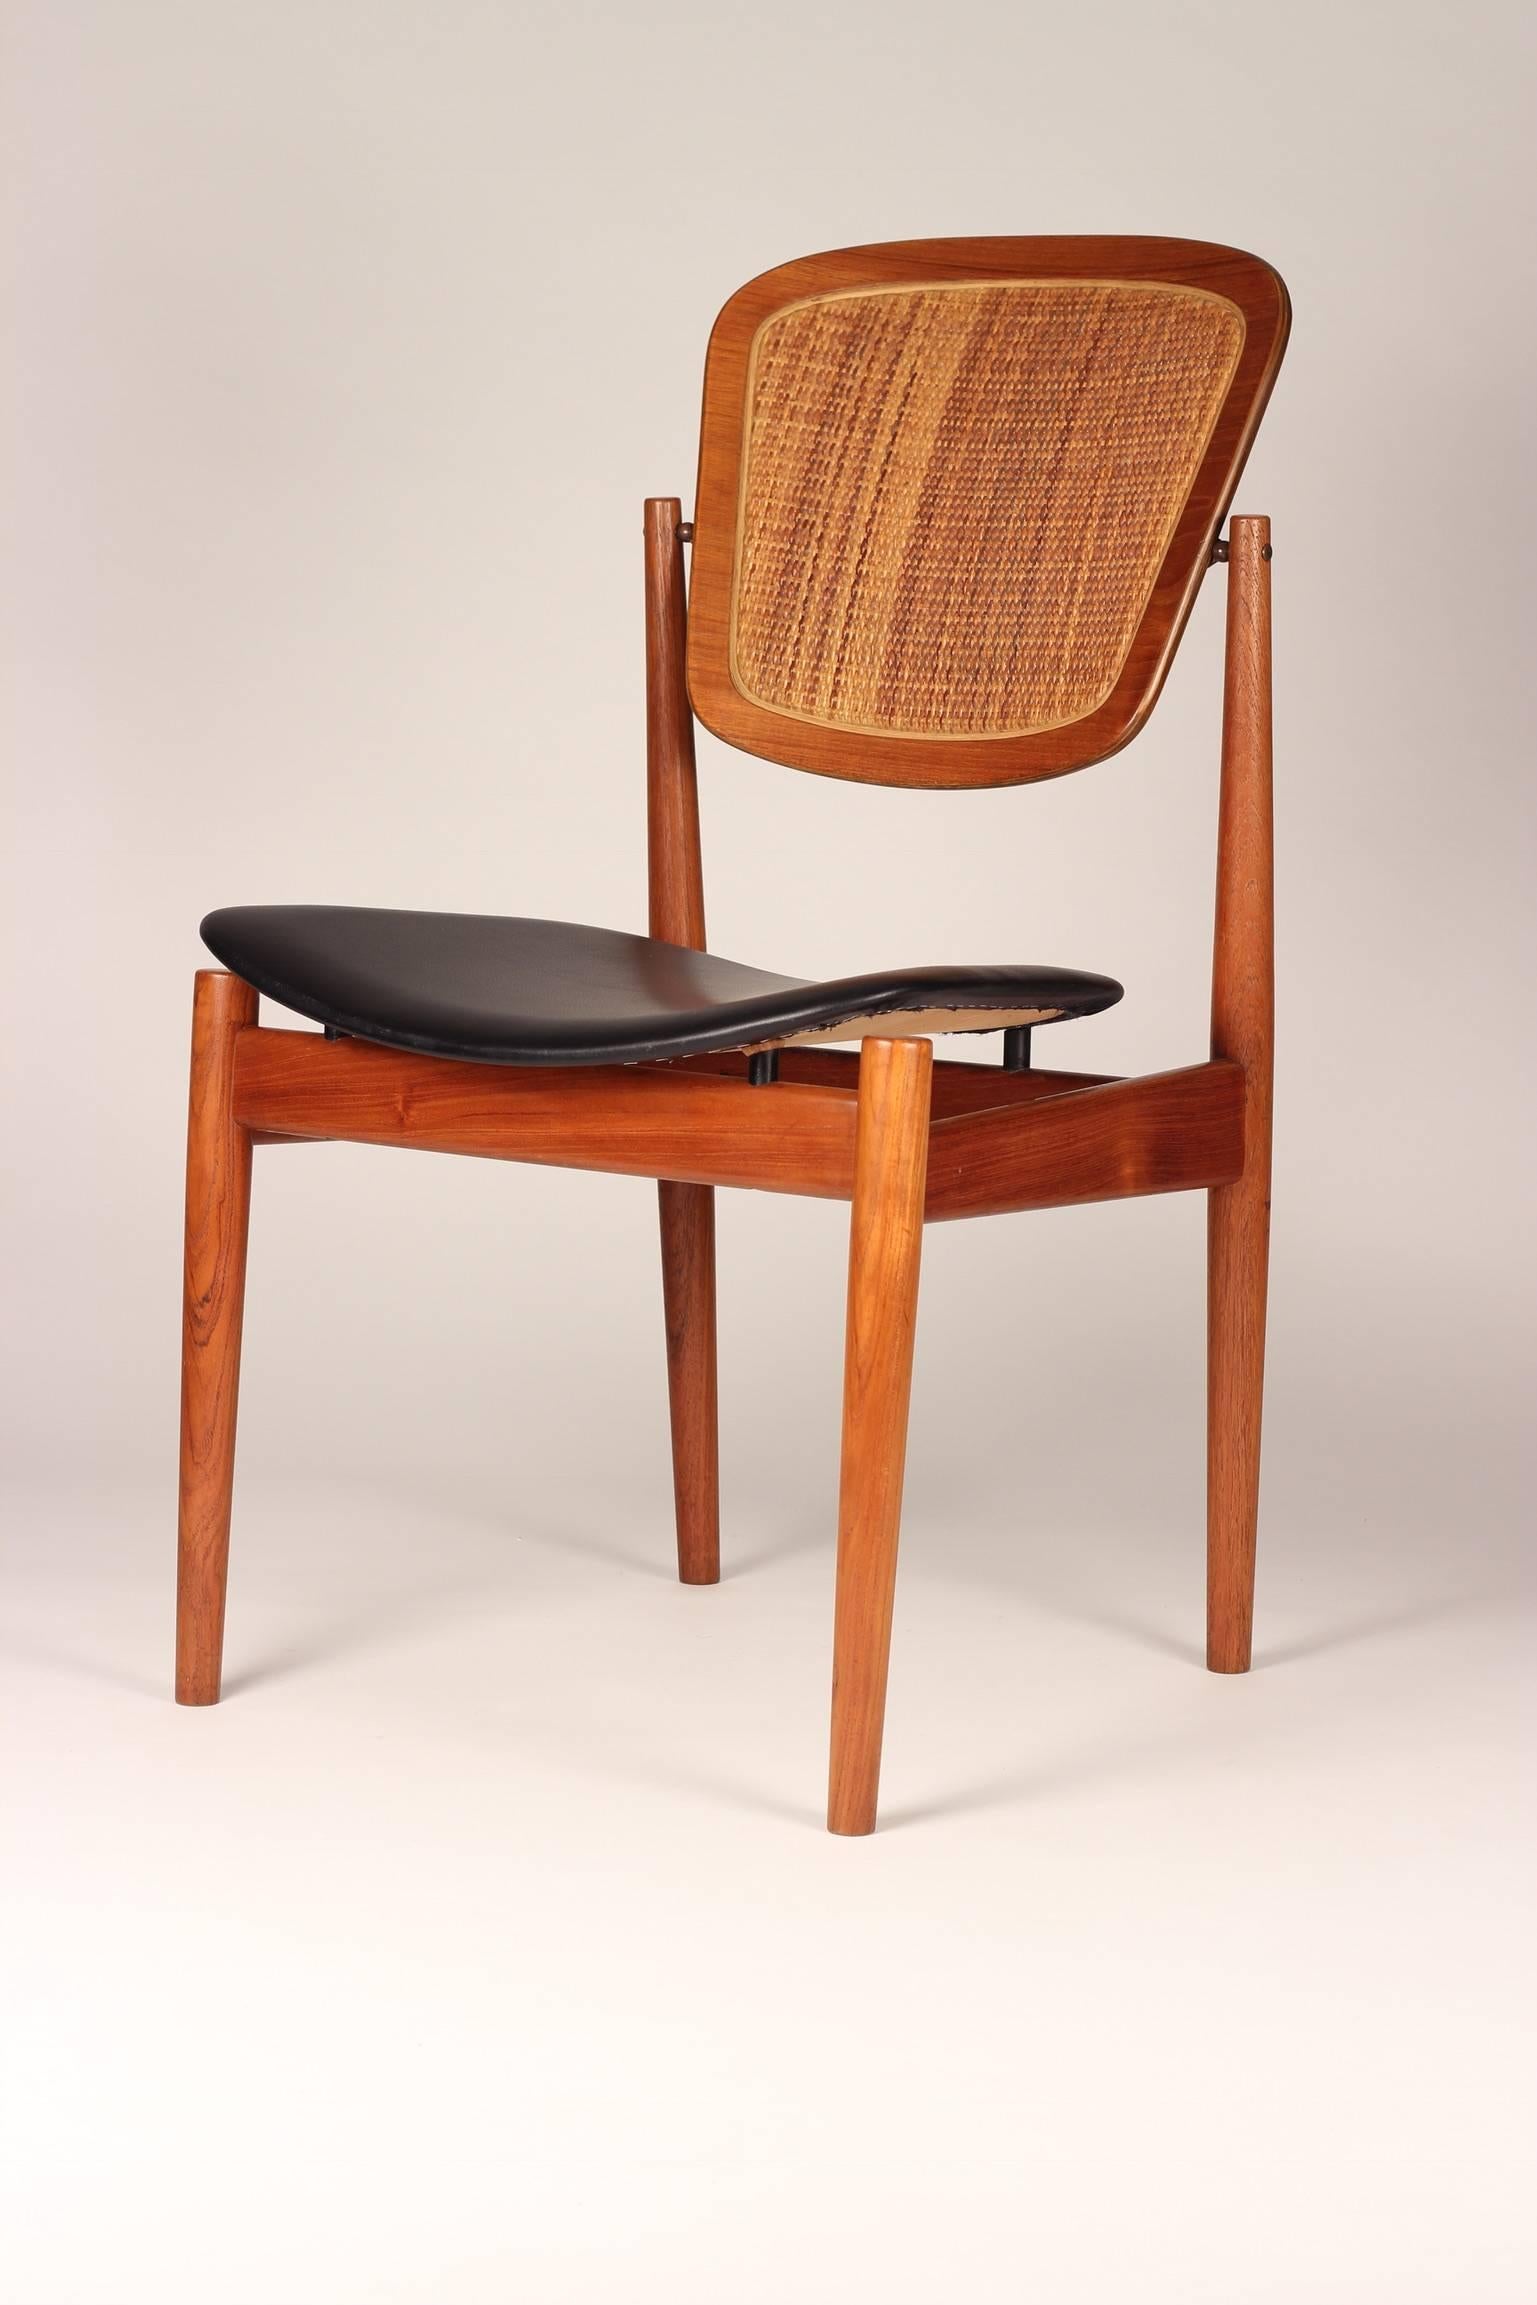 Danish Desk Chair by Arne Vodder in Teak, Cane and Black Leather 2